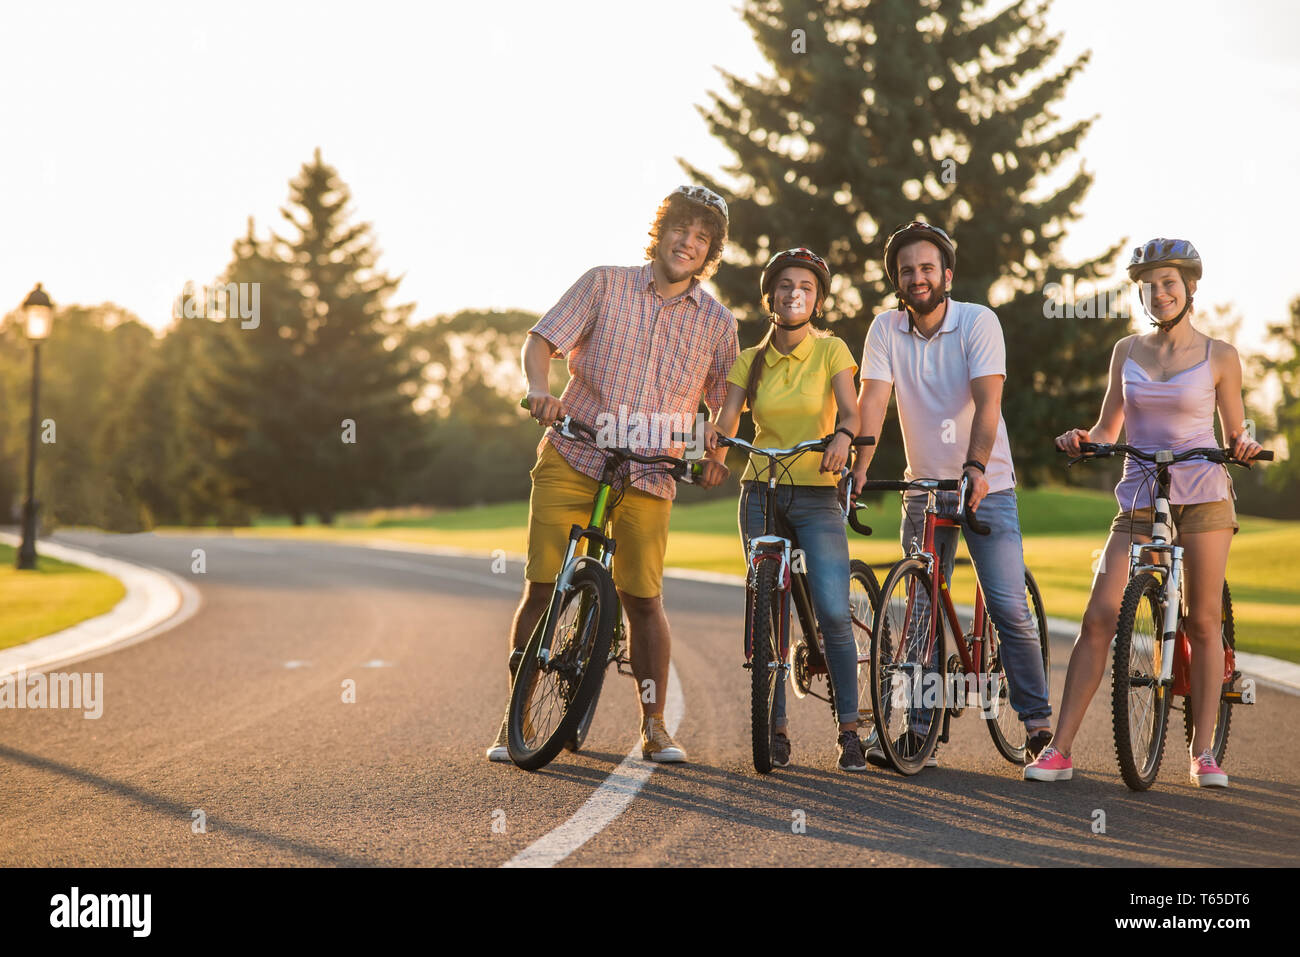 Four happy friends on bikes outdoors. Stock Photo